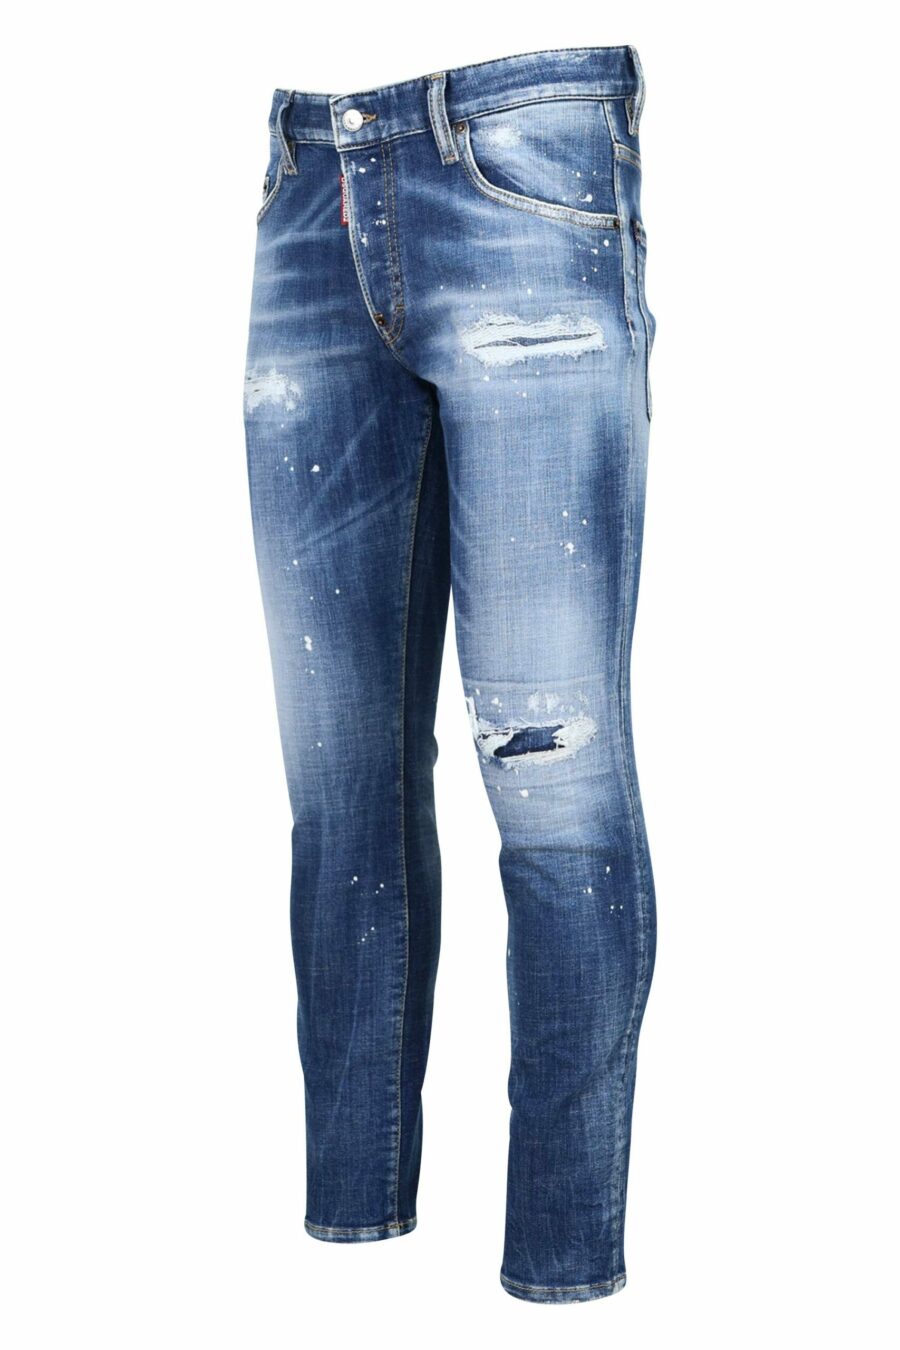 Skater jean light blue jeans with rips and tears - 8052134939482 2 1 scaled